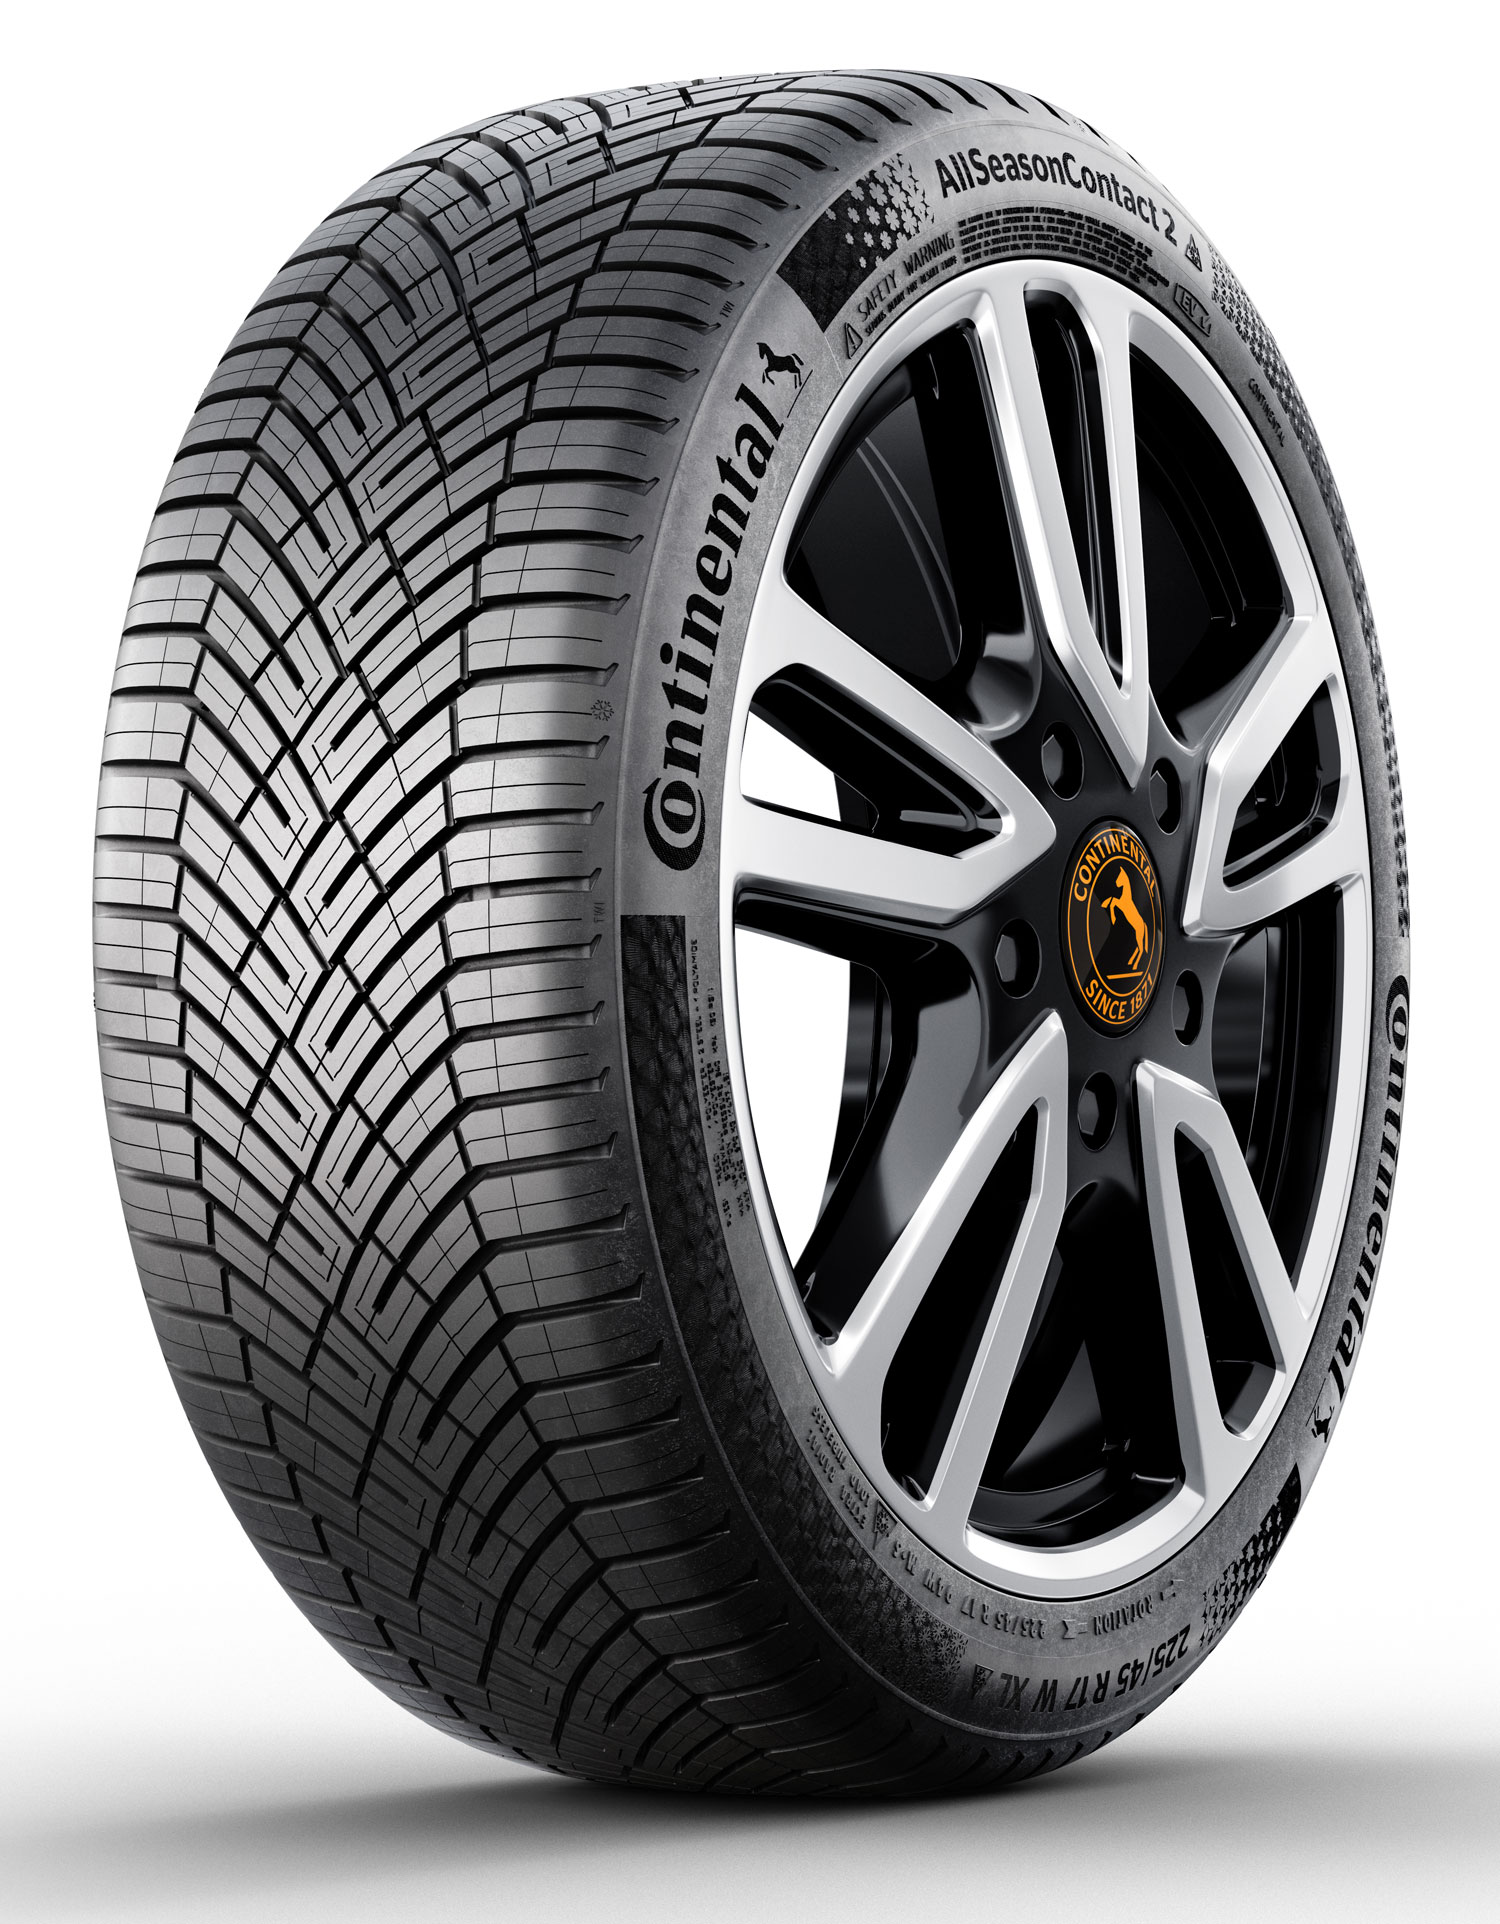 Gomme Nuove Continental 215/55 R16 97V ALLSEASONCONTACT 2 XL M+S pneumatici nuovi All Season